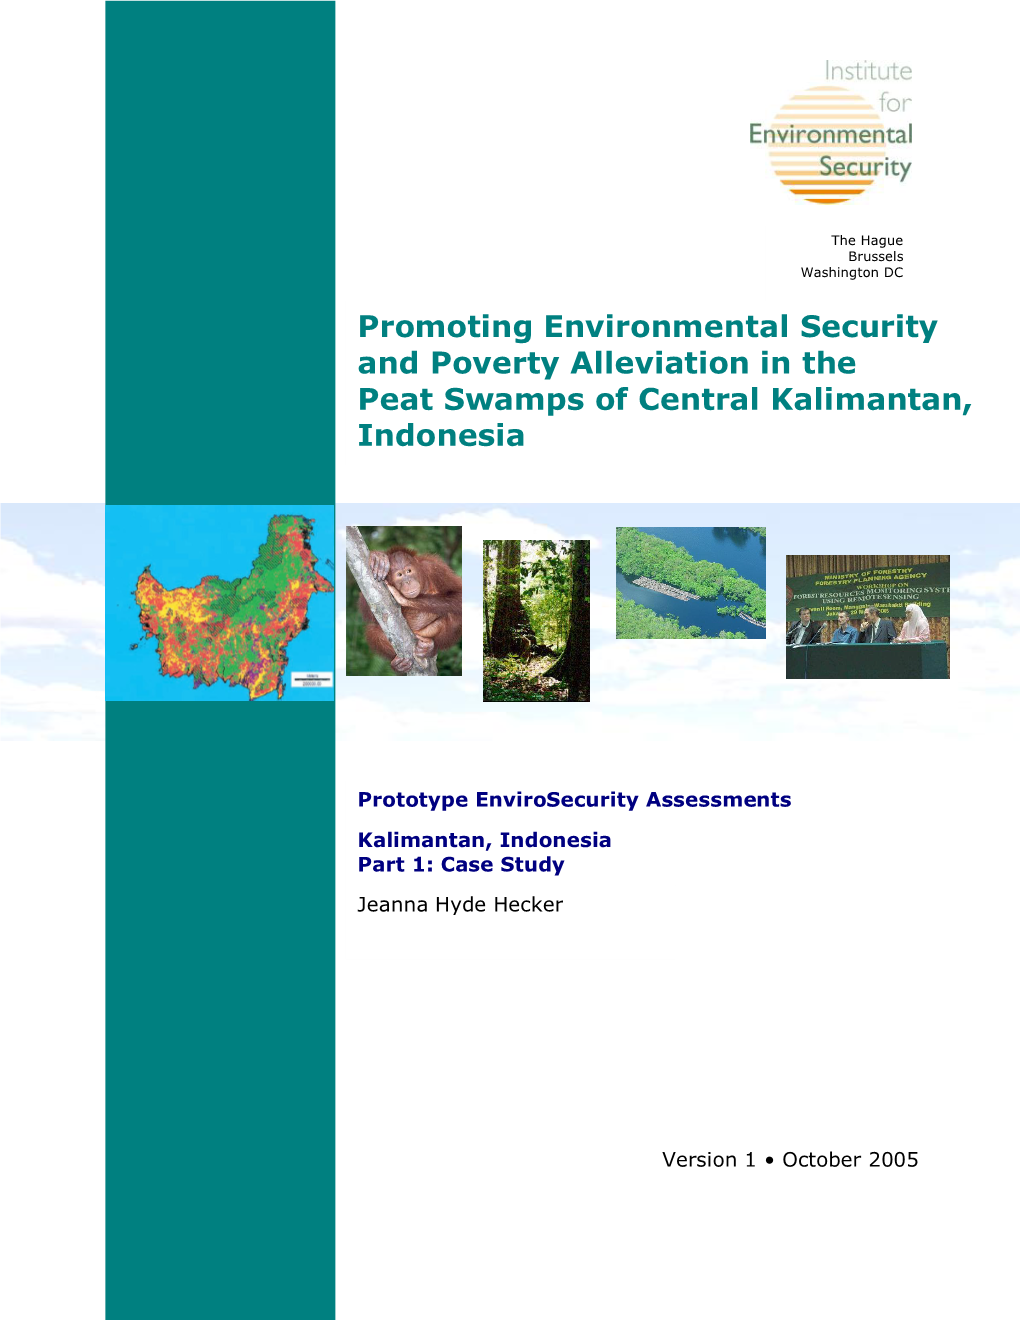 Promoting Environmental Security and Poverty Alleviation in the Peat Swamps of Central Kalimantan, Indonesia